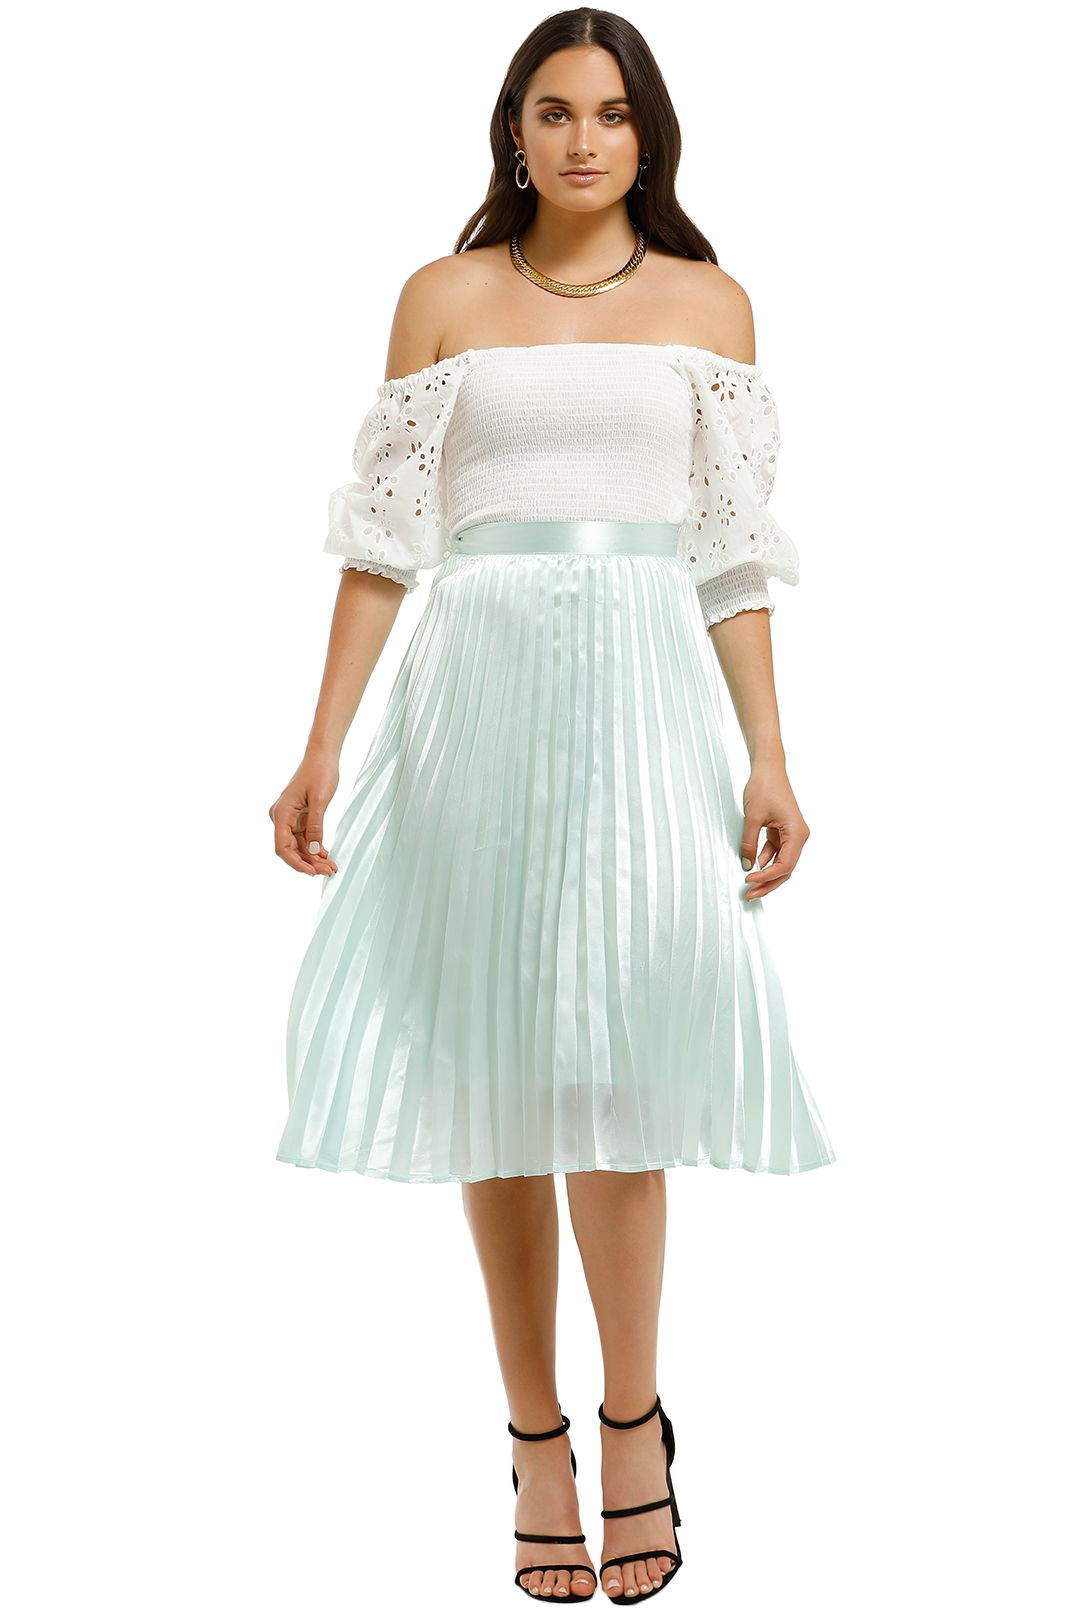 Charlie-Holiday-Juniper-Pleated-Skirt-Sea-Foam-Front